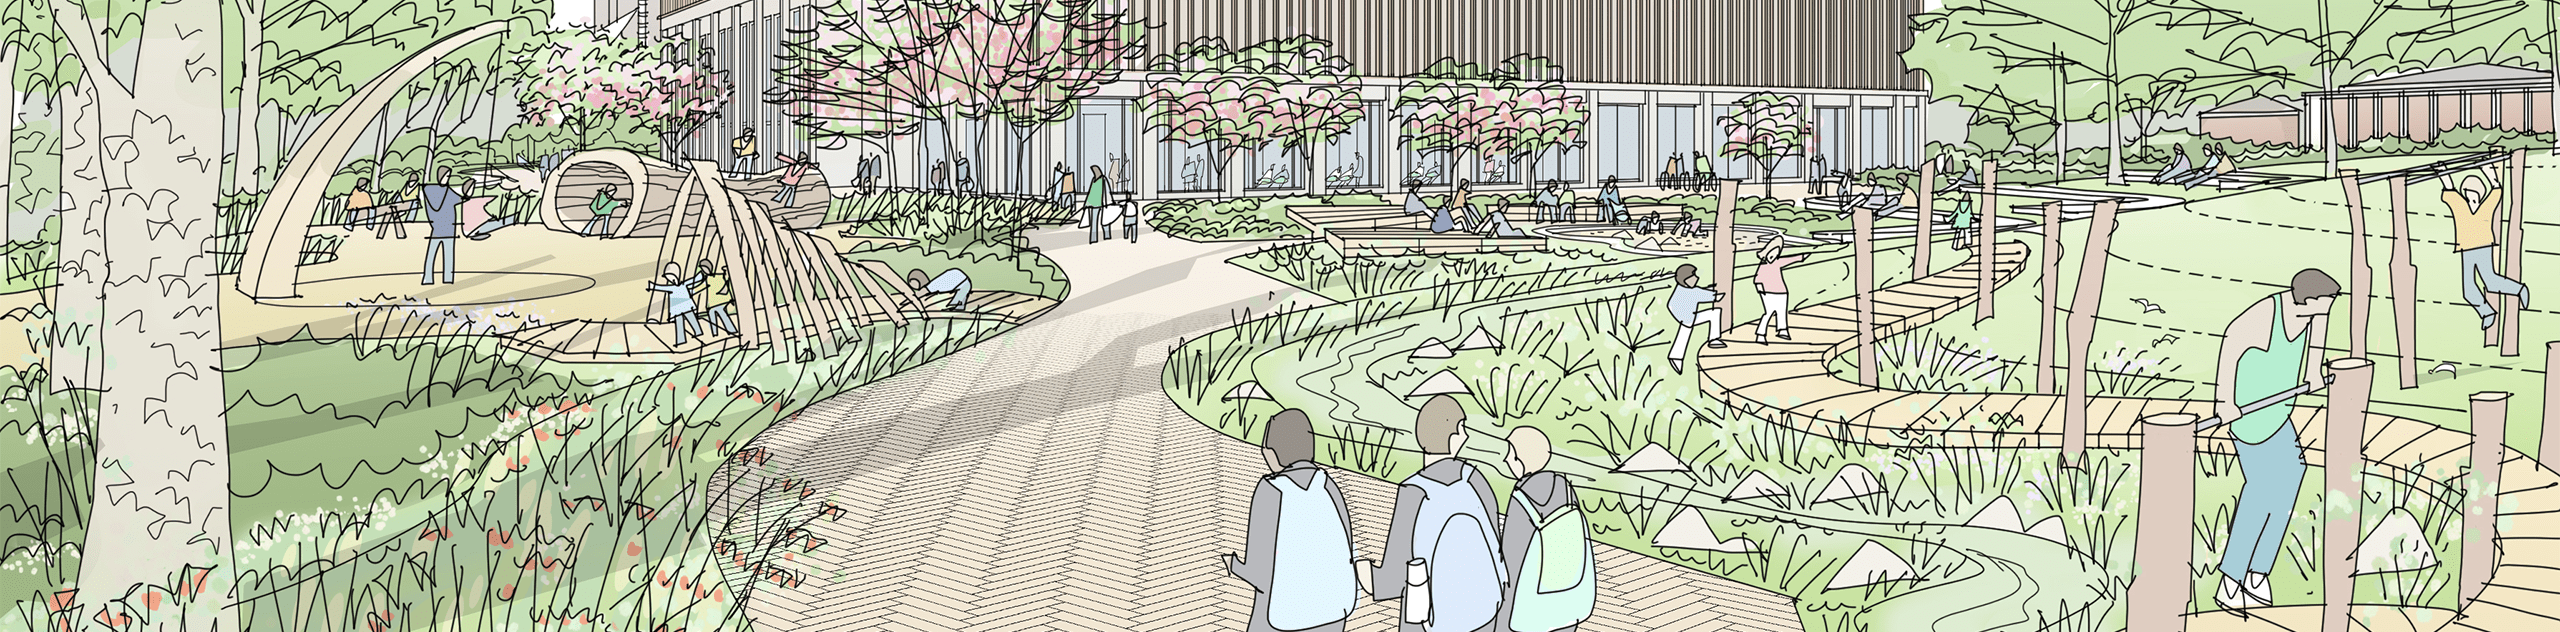 A sketch view of a footpath meandering through the natural play proposed at Kingston Leisure Centre. © BMD & James Holyoak